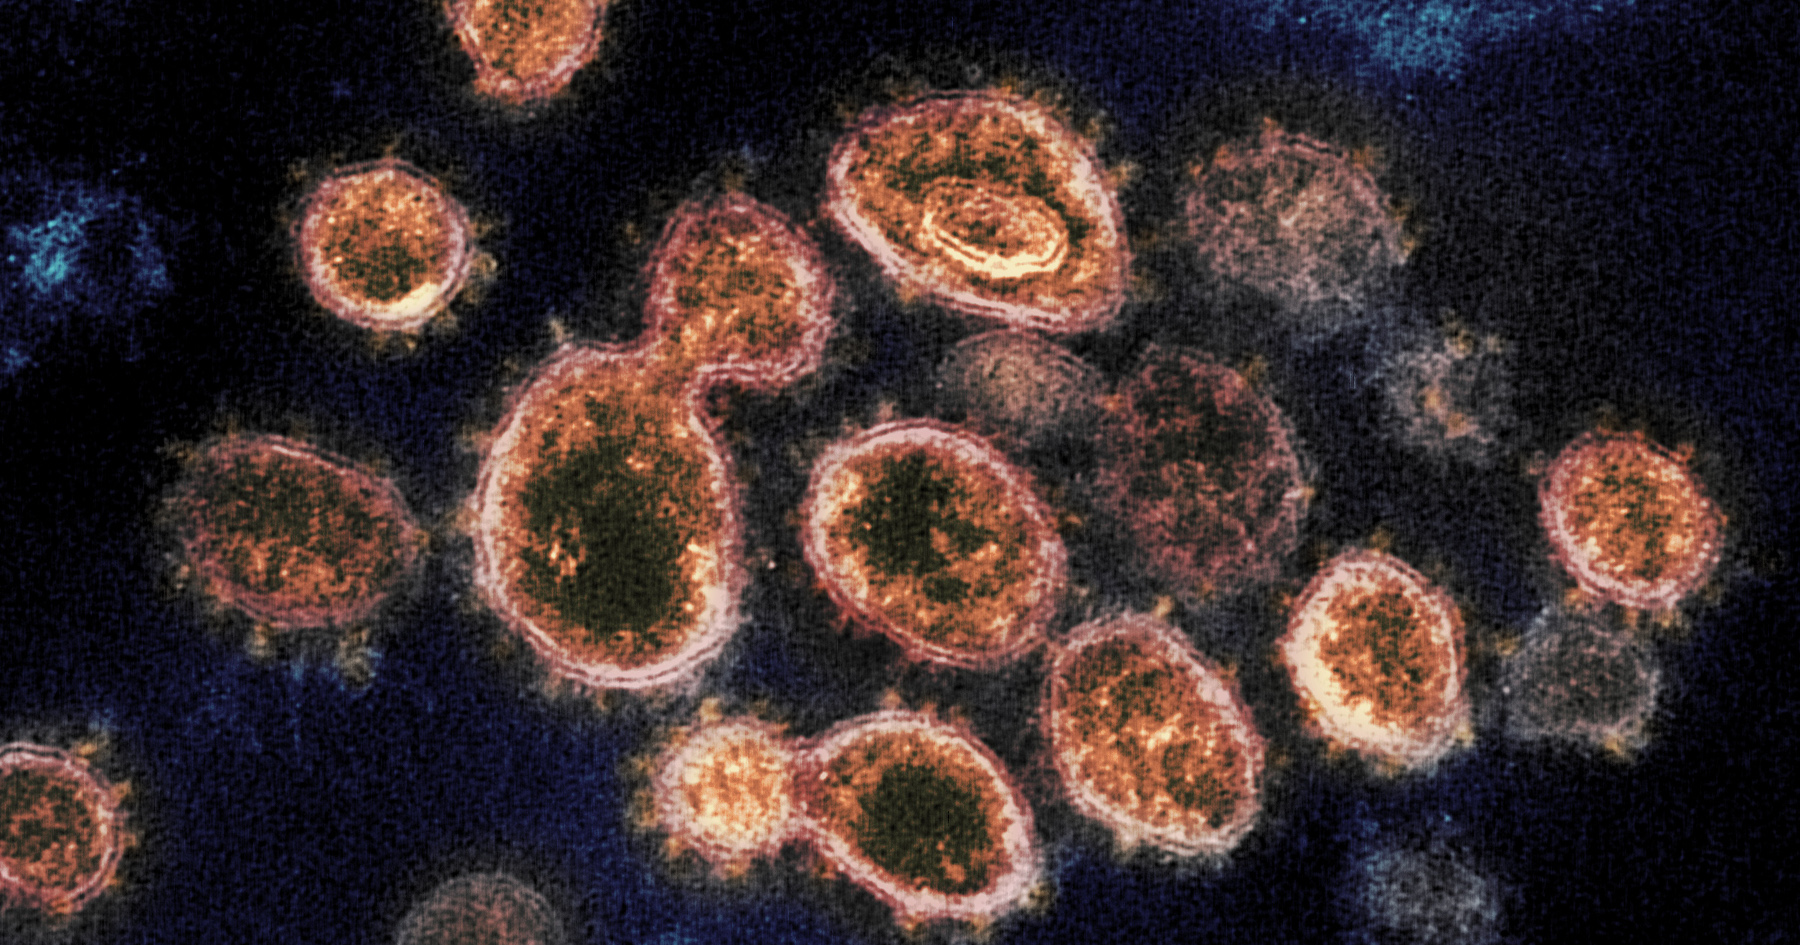 Electron microscope image of SARS-CoV-2 virus particles. Virus particles are shown emerging from the surface of cells cultured in the lab. Image captured and colourized at NIAID’s Rocky Mountain Laboratories in Hamilton, Montana. Photo by: NIAID. Creative Commons CC BY 2.0 DEED Attribution 2.0 Generic license: https://creativecommons.org/licenses/by/2.0/.